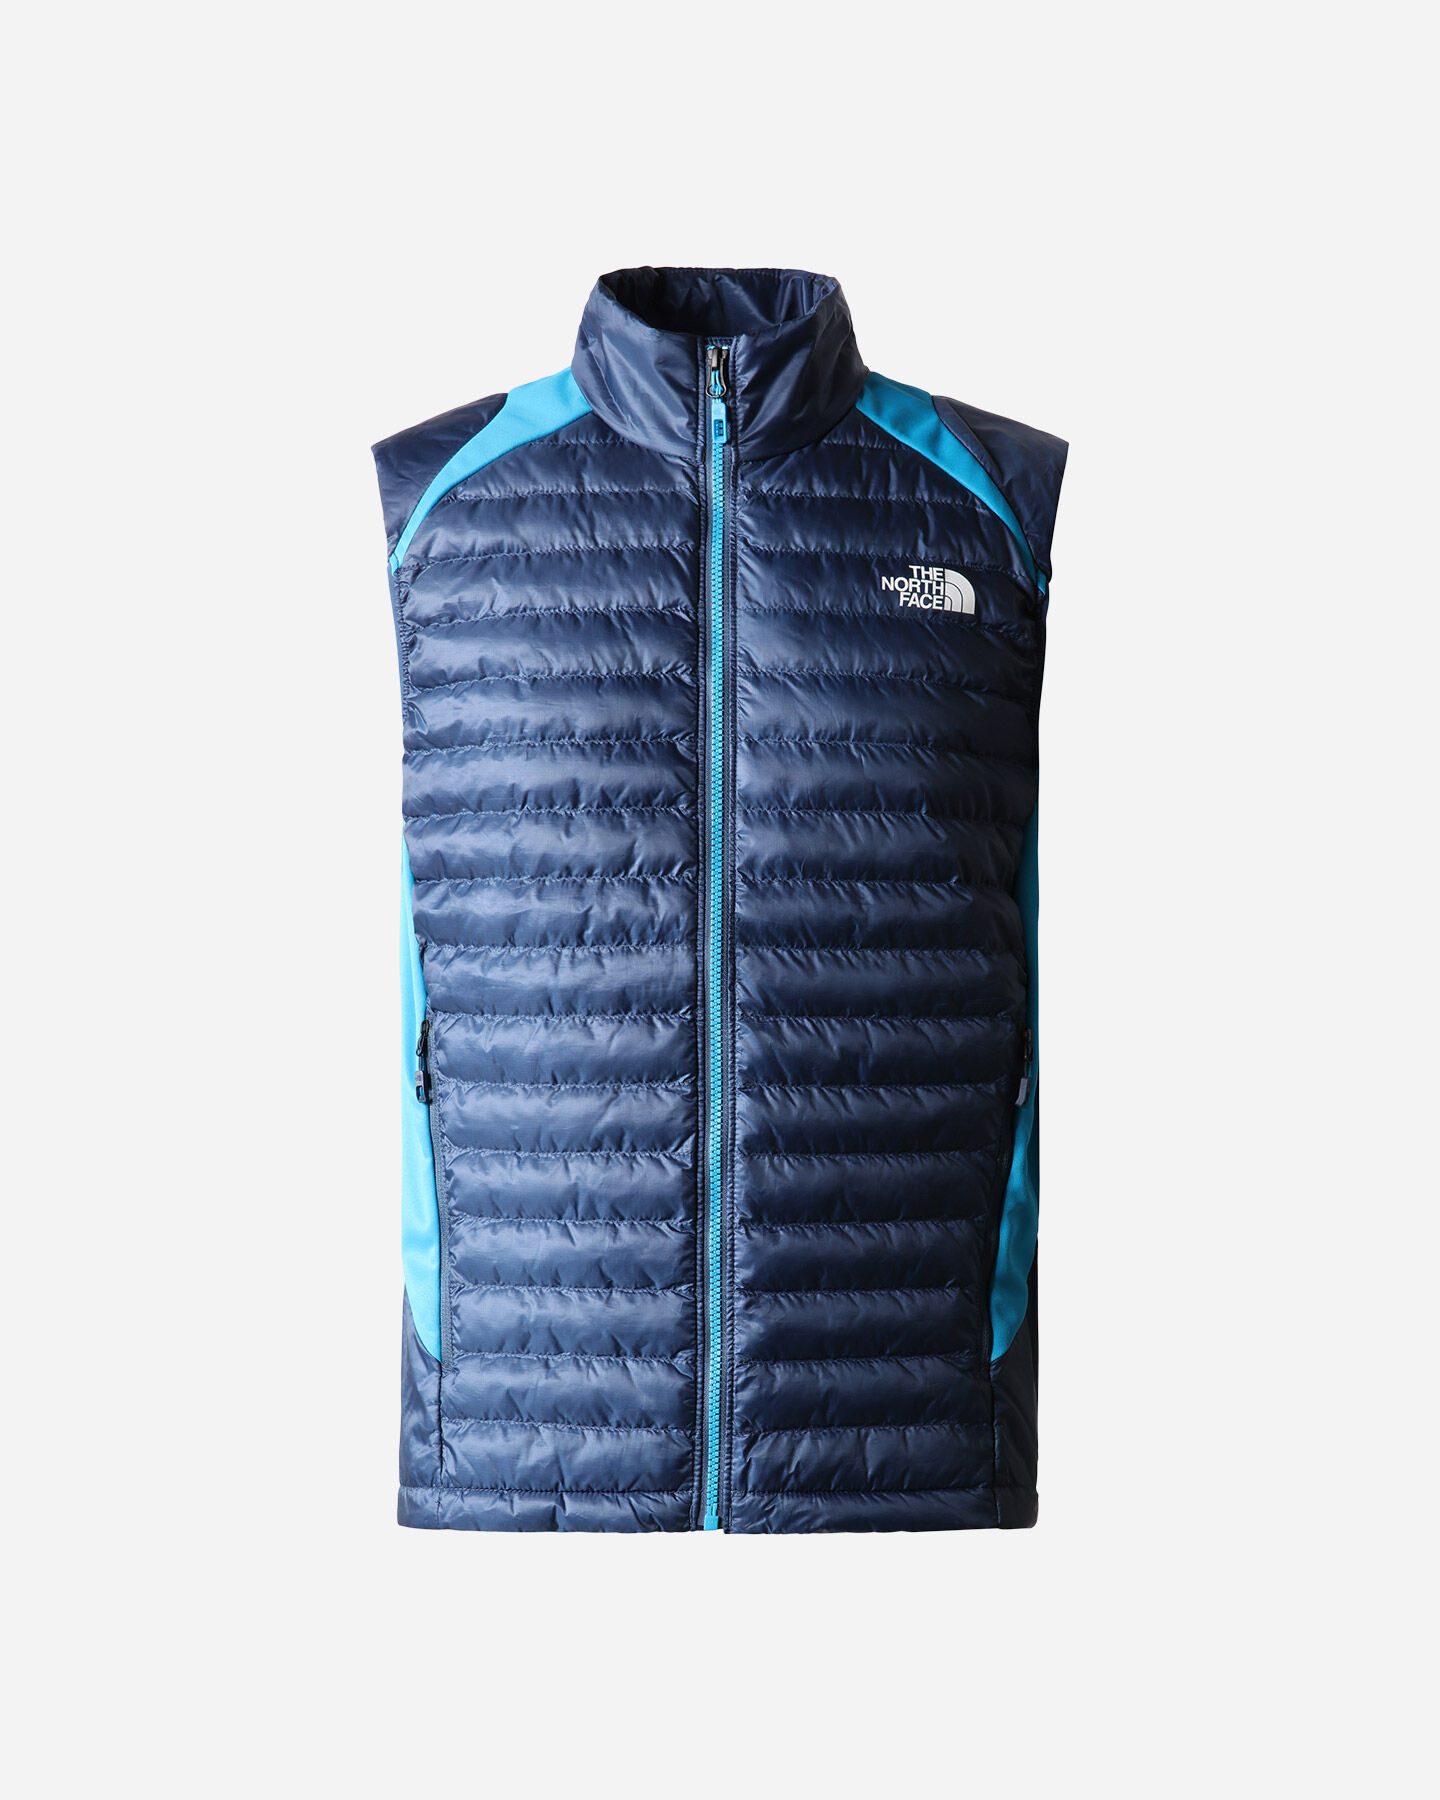  Gilet THE NORTH FACE INSULATION HYBRID M S5474958|83R|S scatto 0